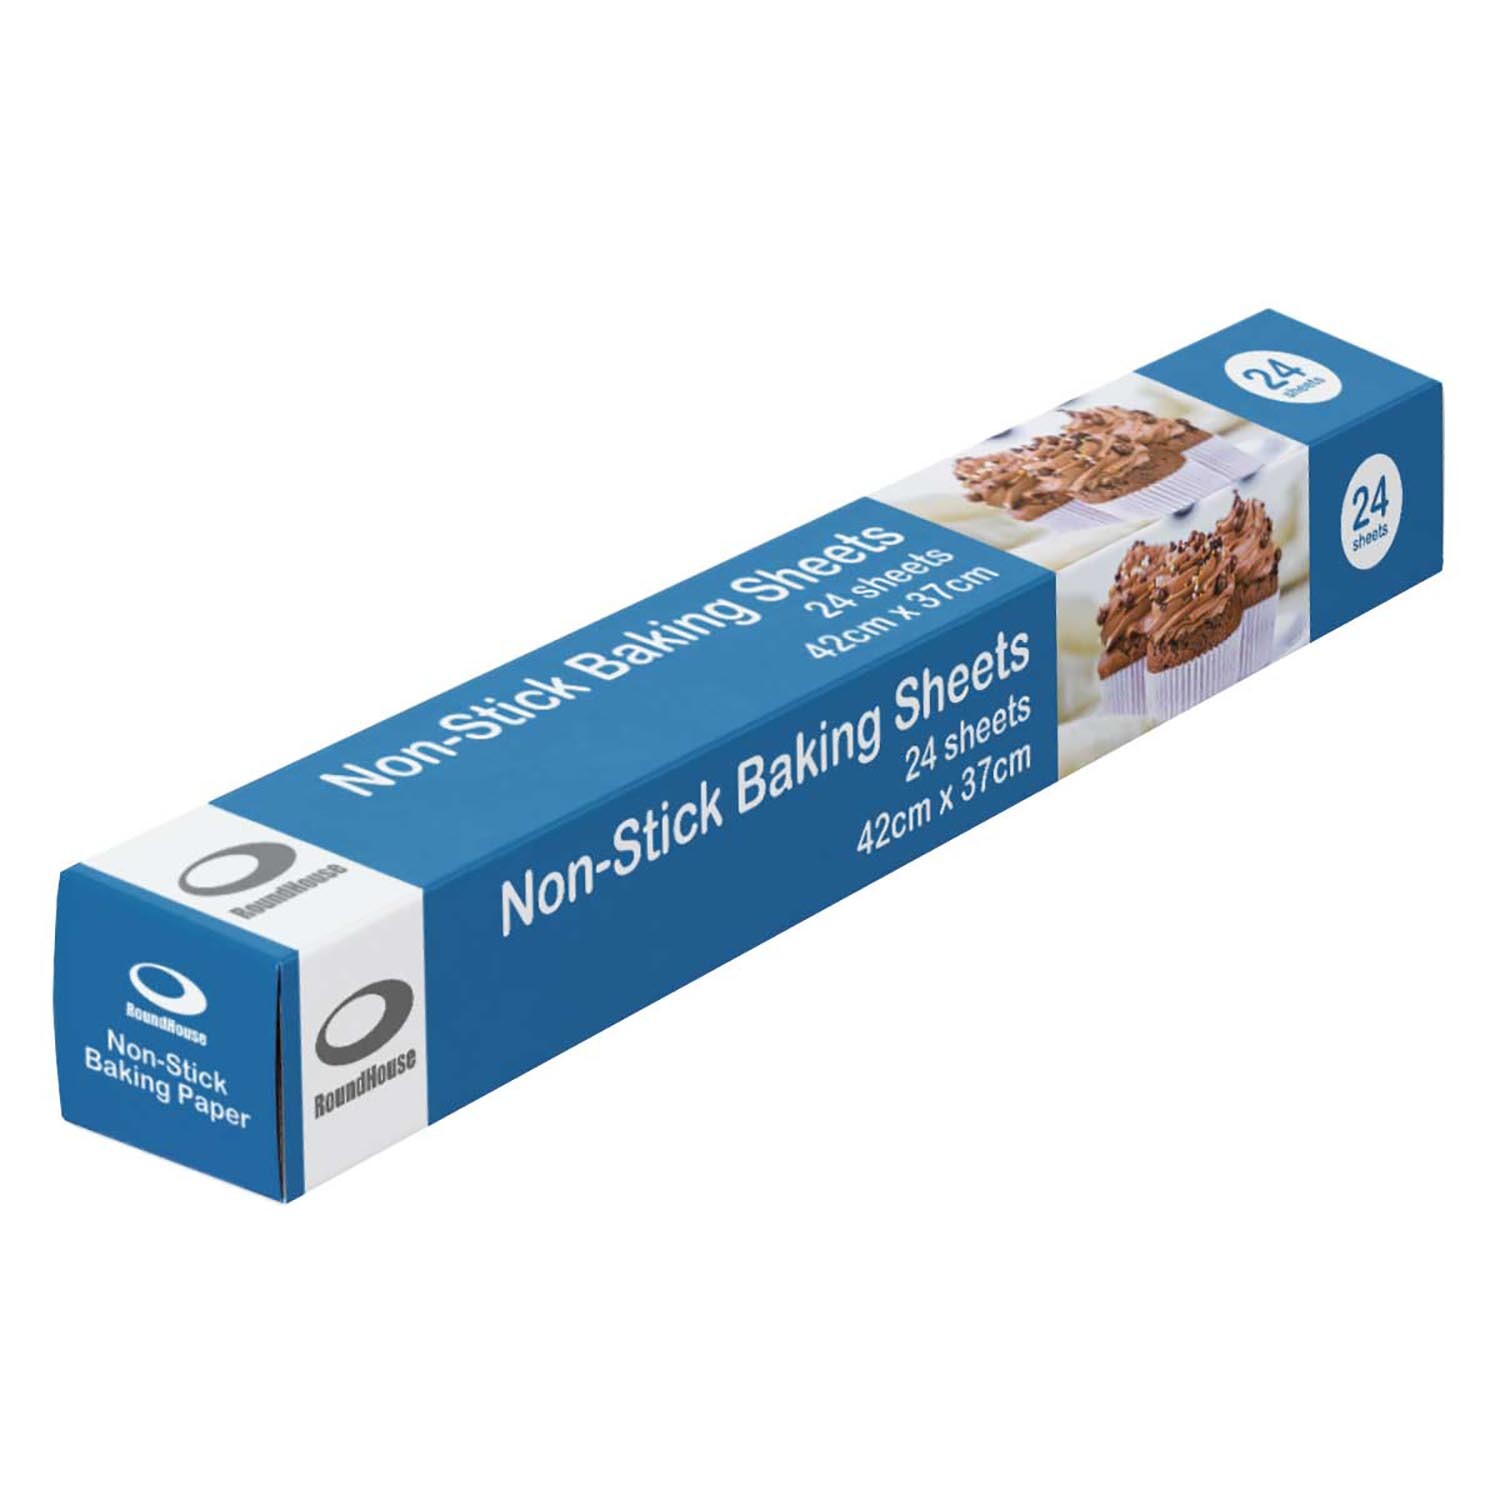 Pack of 24 Non-Stick Baking Sheets Image